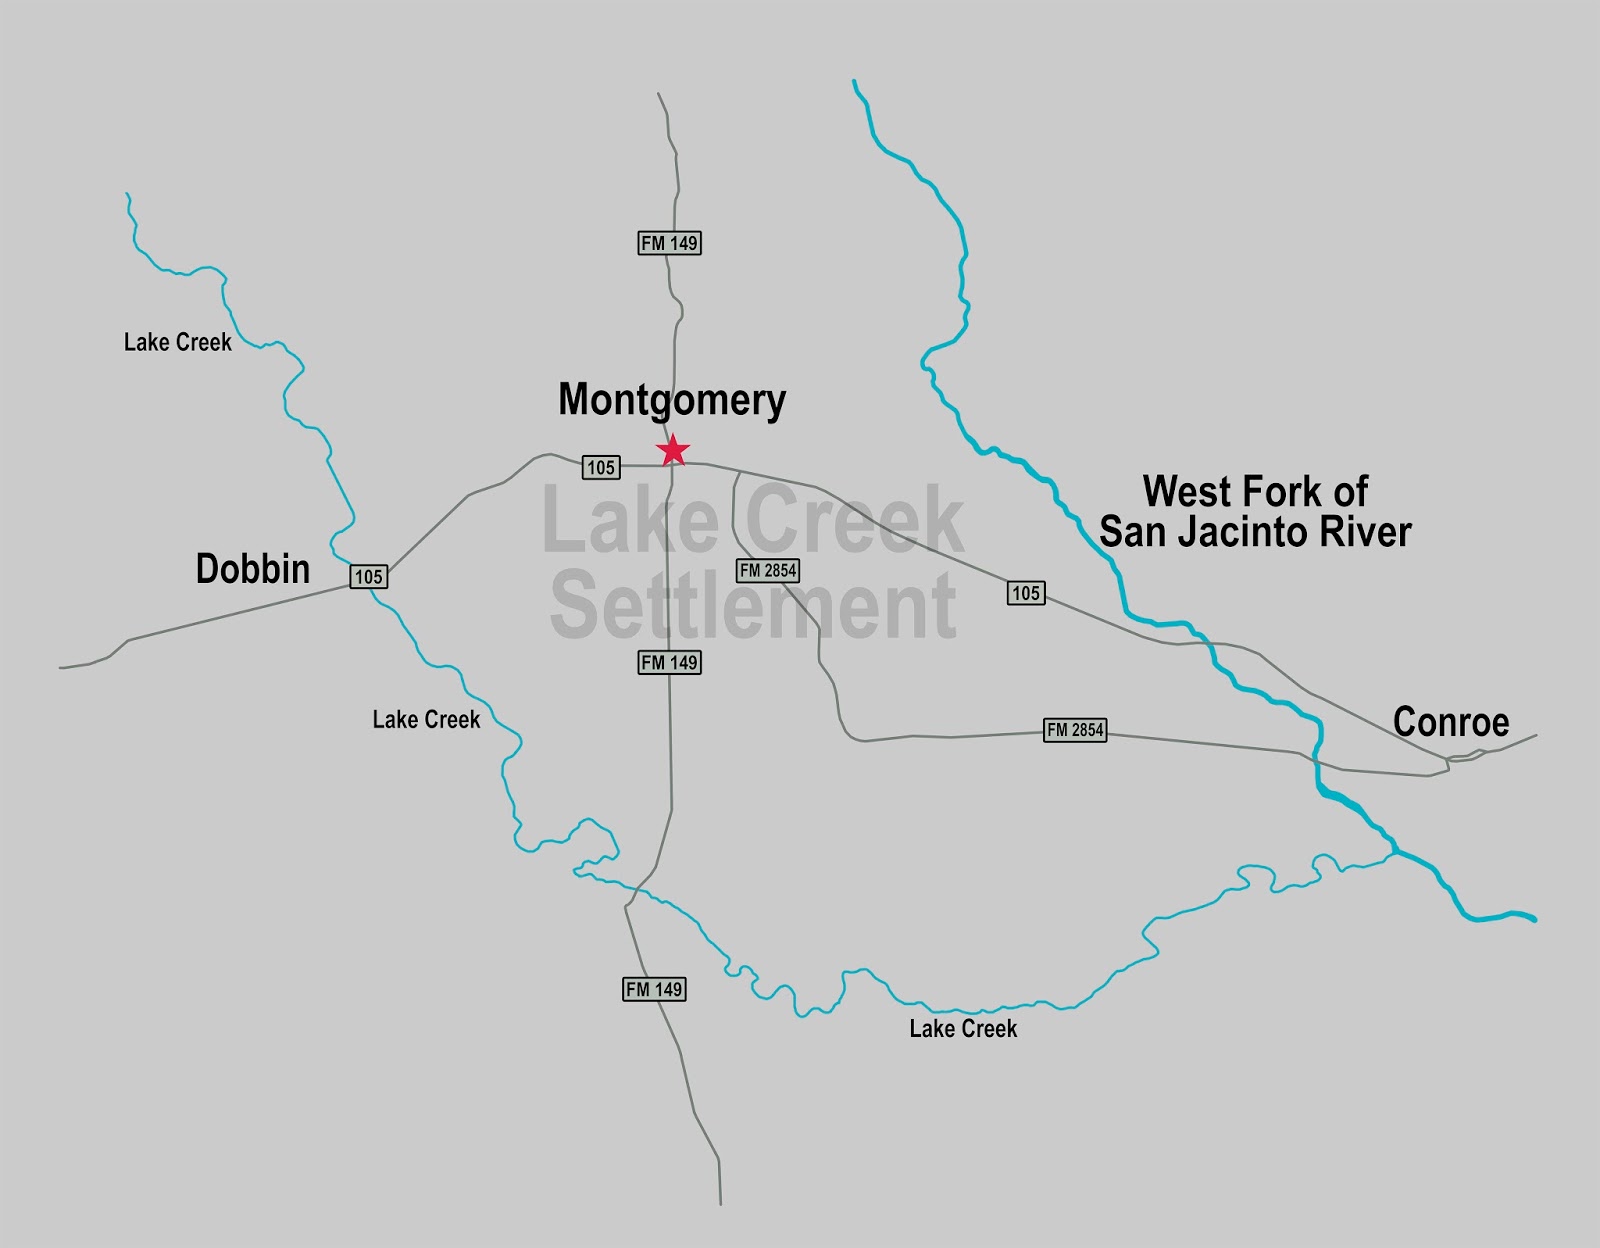 Lake Creek Settlement Map Showing Current Cities and Roads